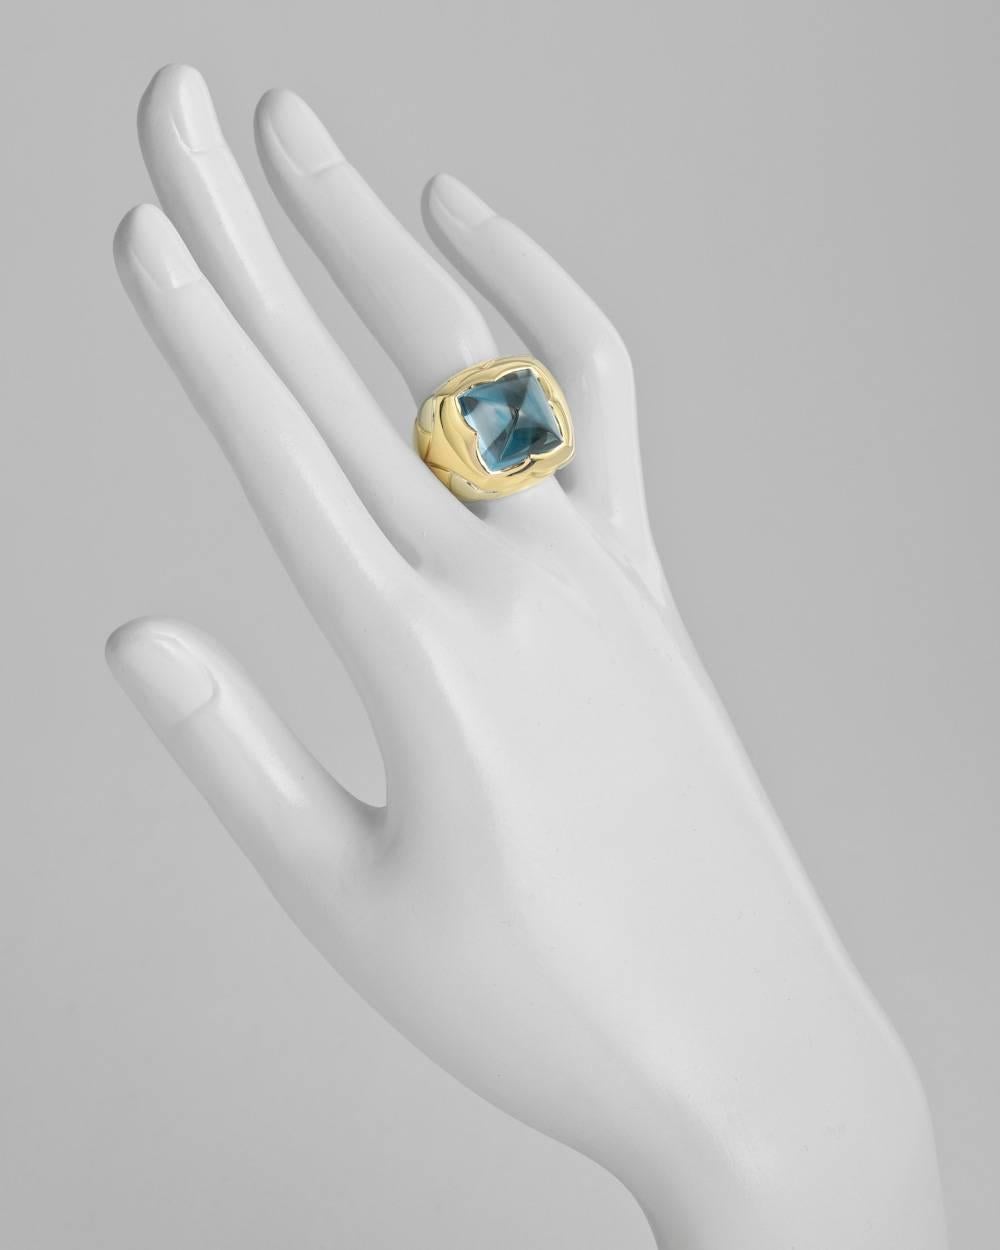 "Piramide" cocktail ring, centering a high-pointed cabochon sugarloaf-cut blue topaz measuring approximately 13.5 x 13.5mm from the top, mounted in polished 18k yellow with white gold elements at shoulders, the ring measuring 20mm across x